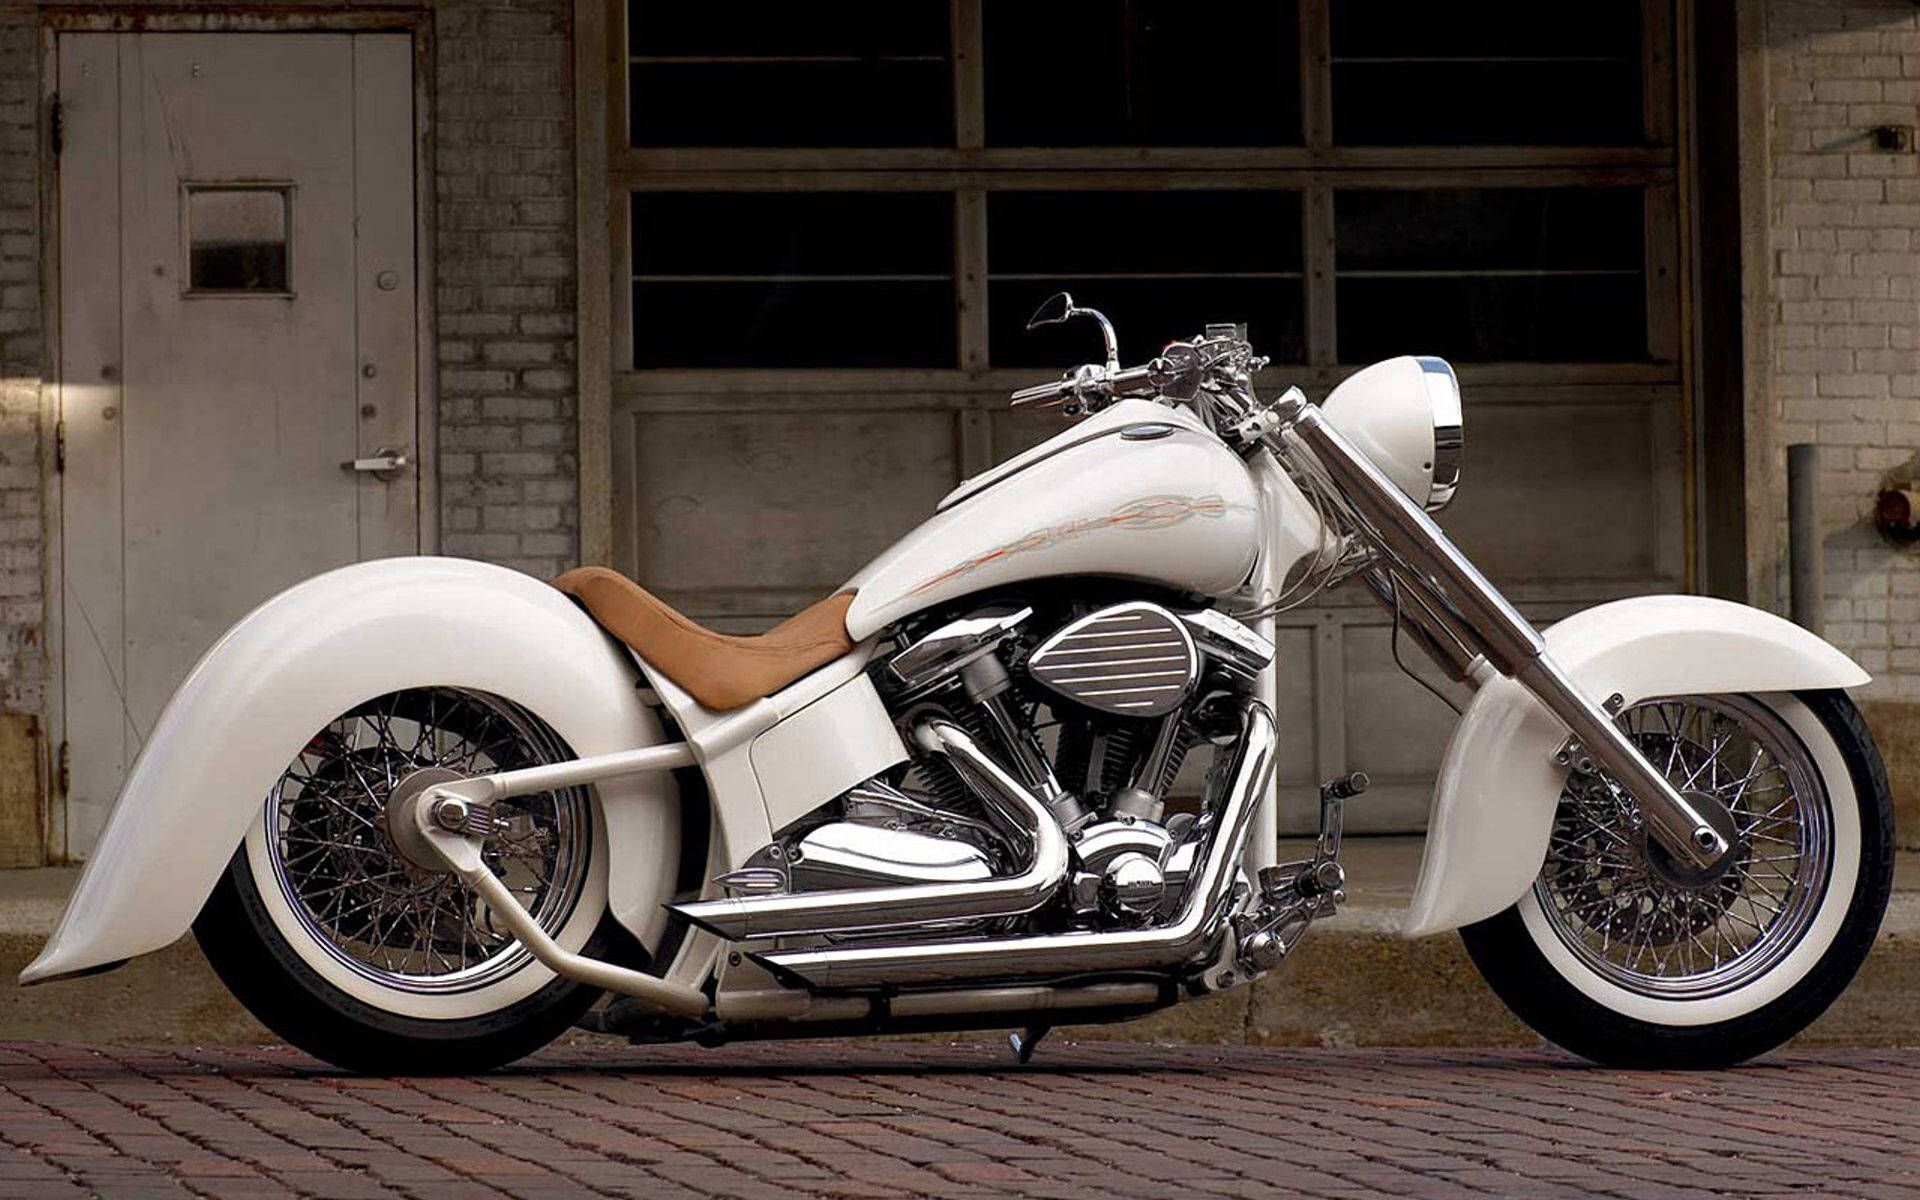 A White Motorcycle Parked On A Brick Sidewalk Background